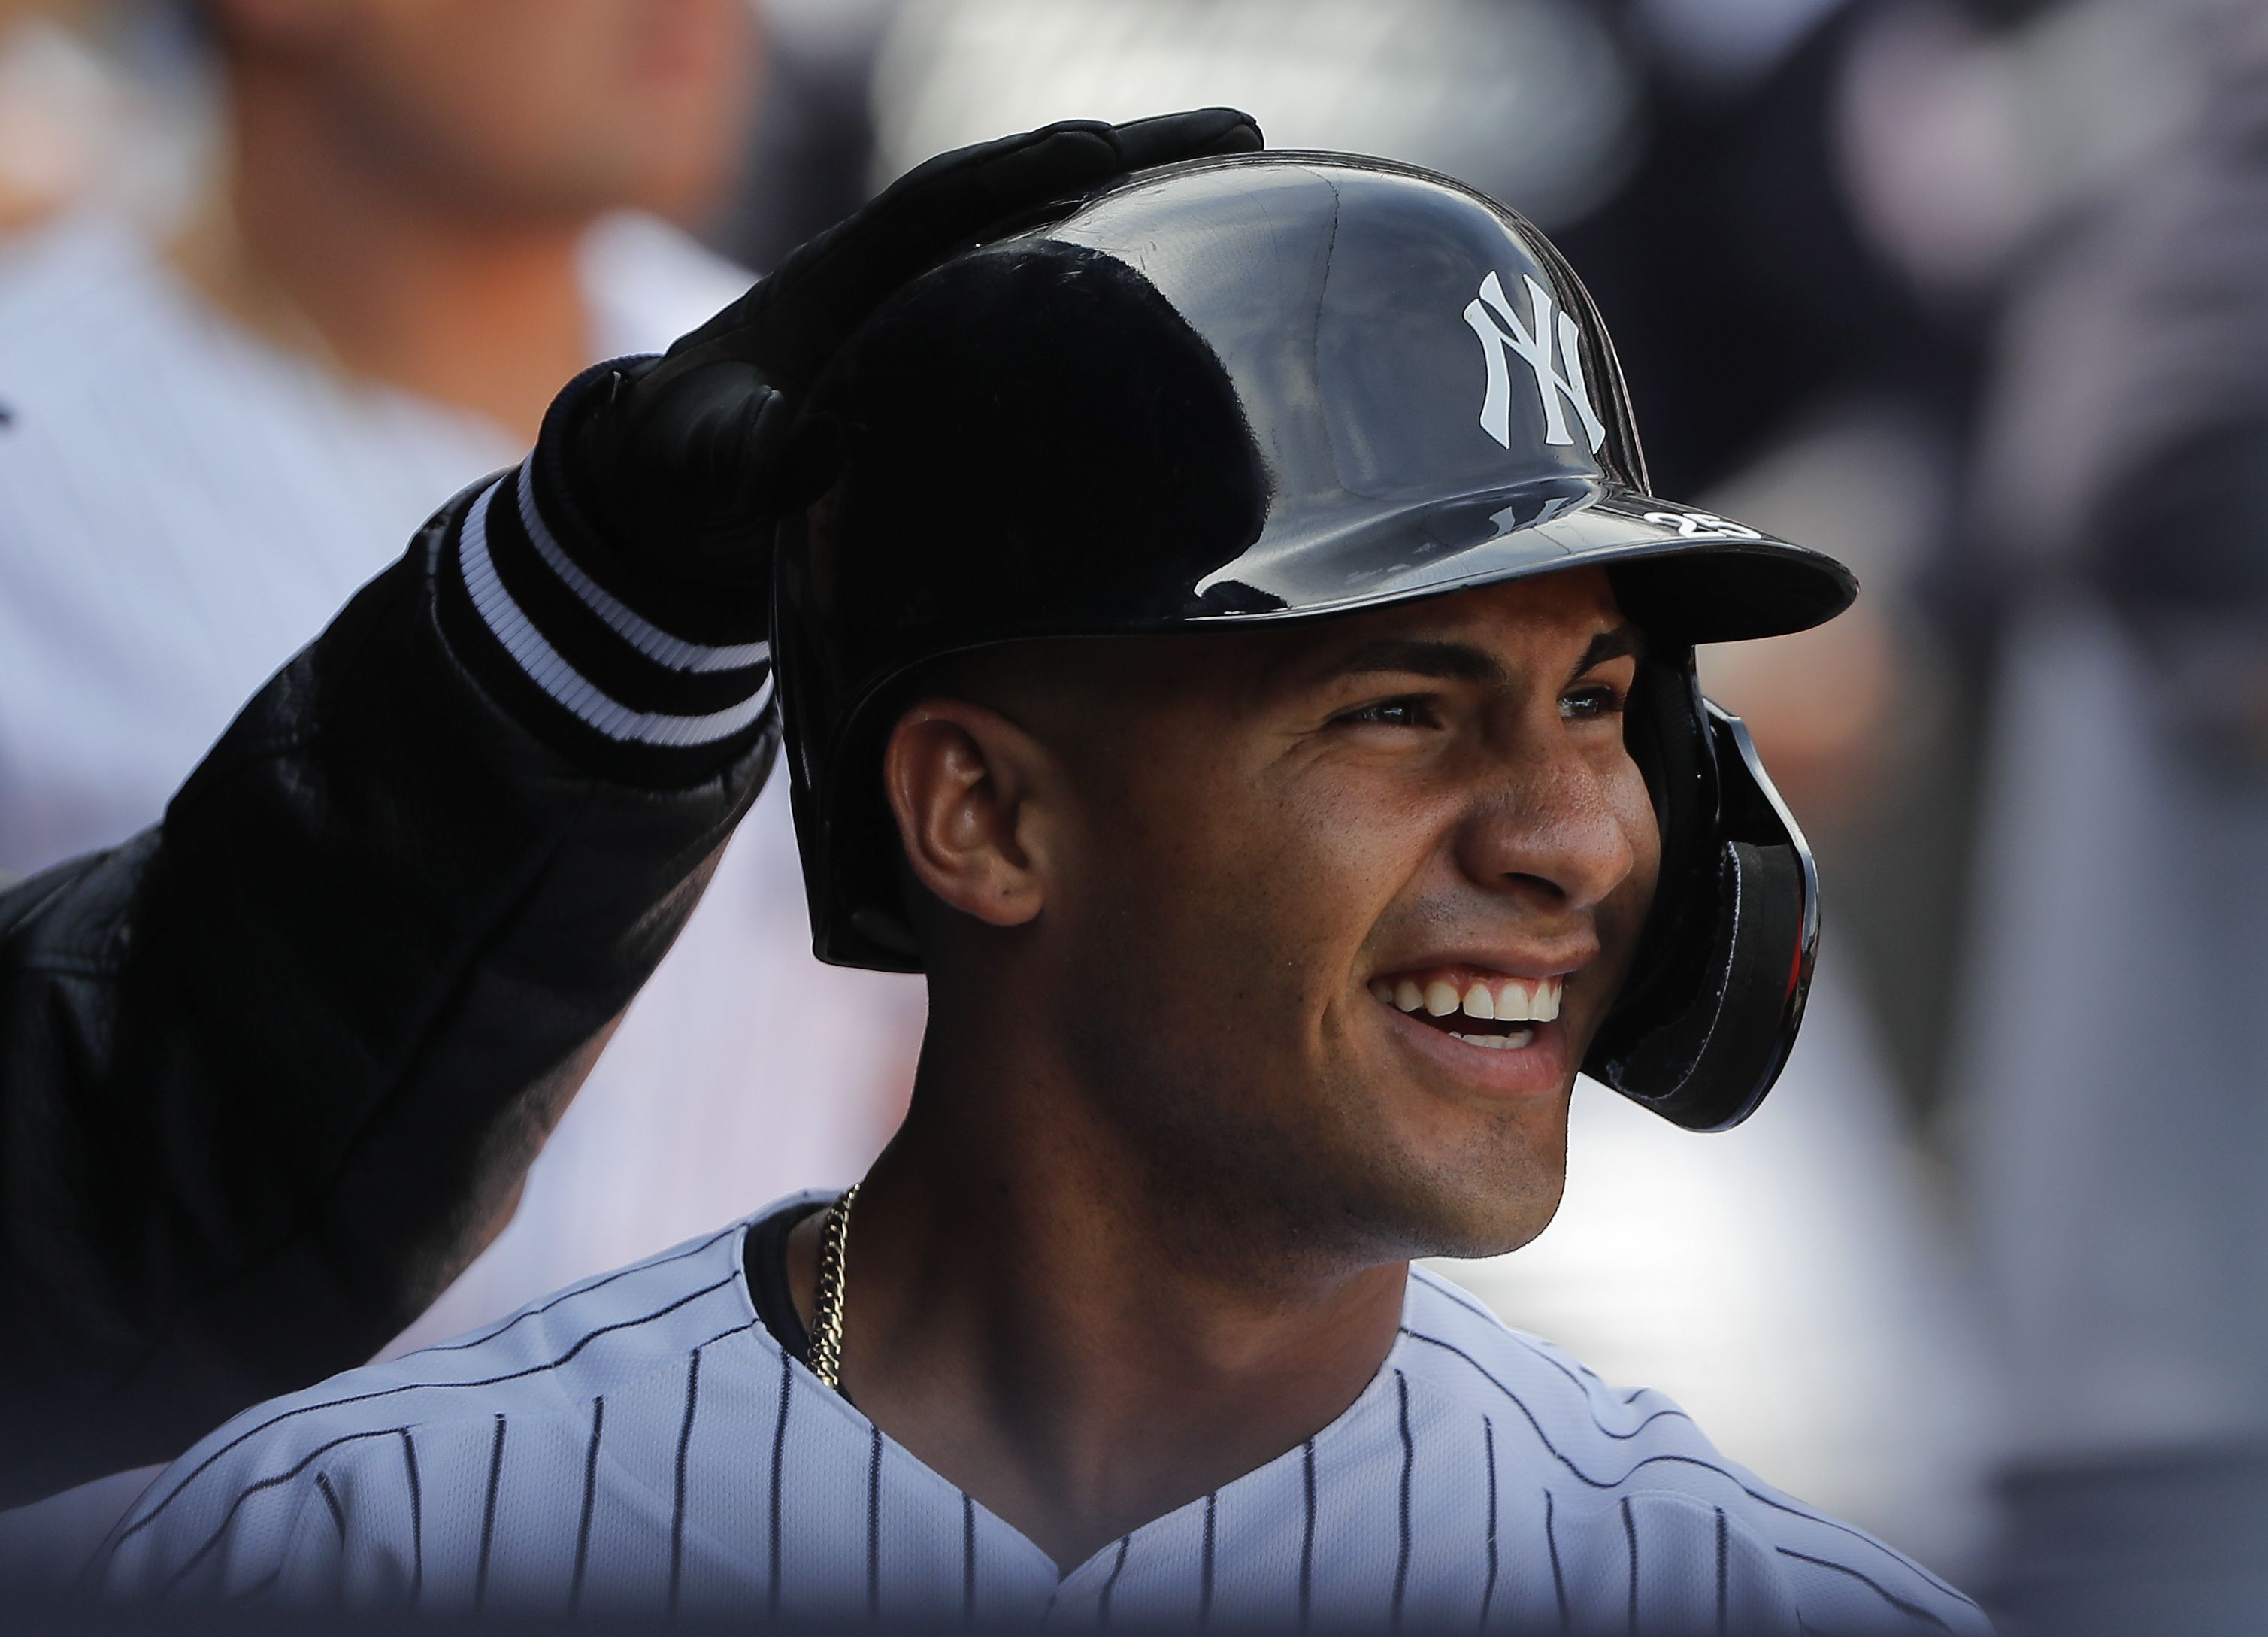 Latest injury news on Yankees' Gleyber Torres, who's seeing